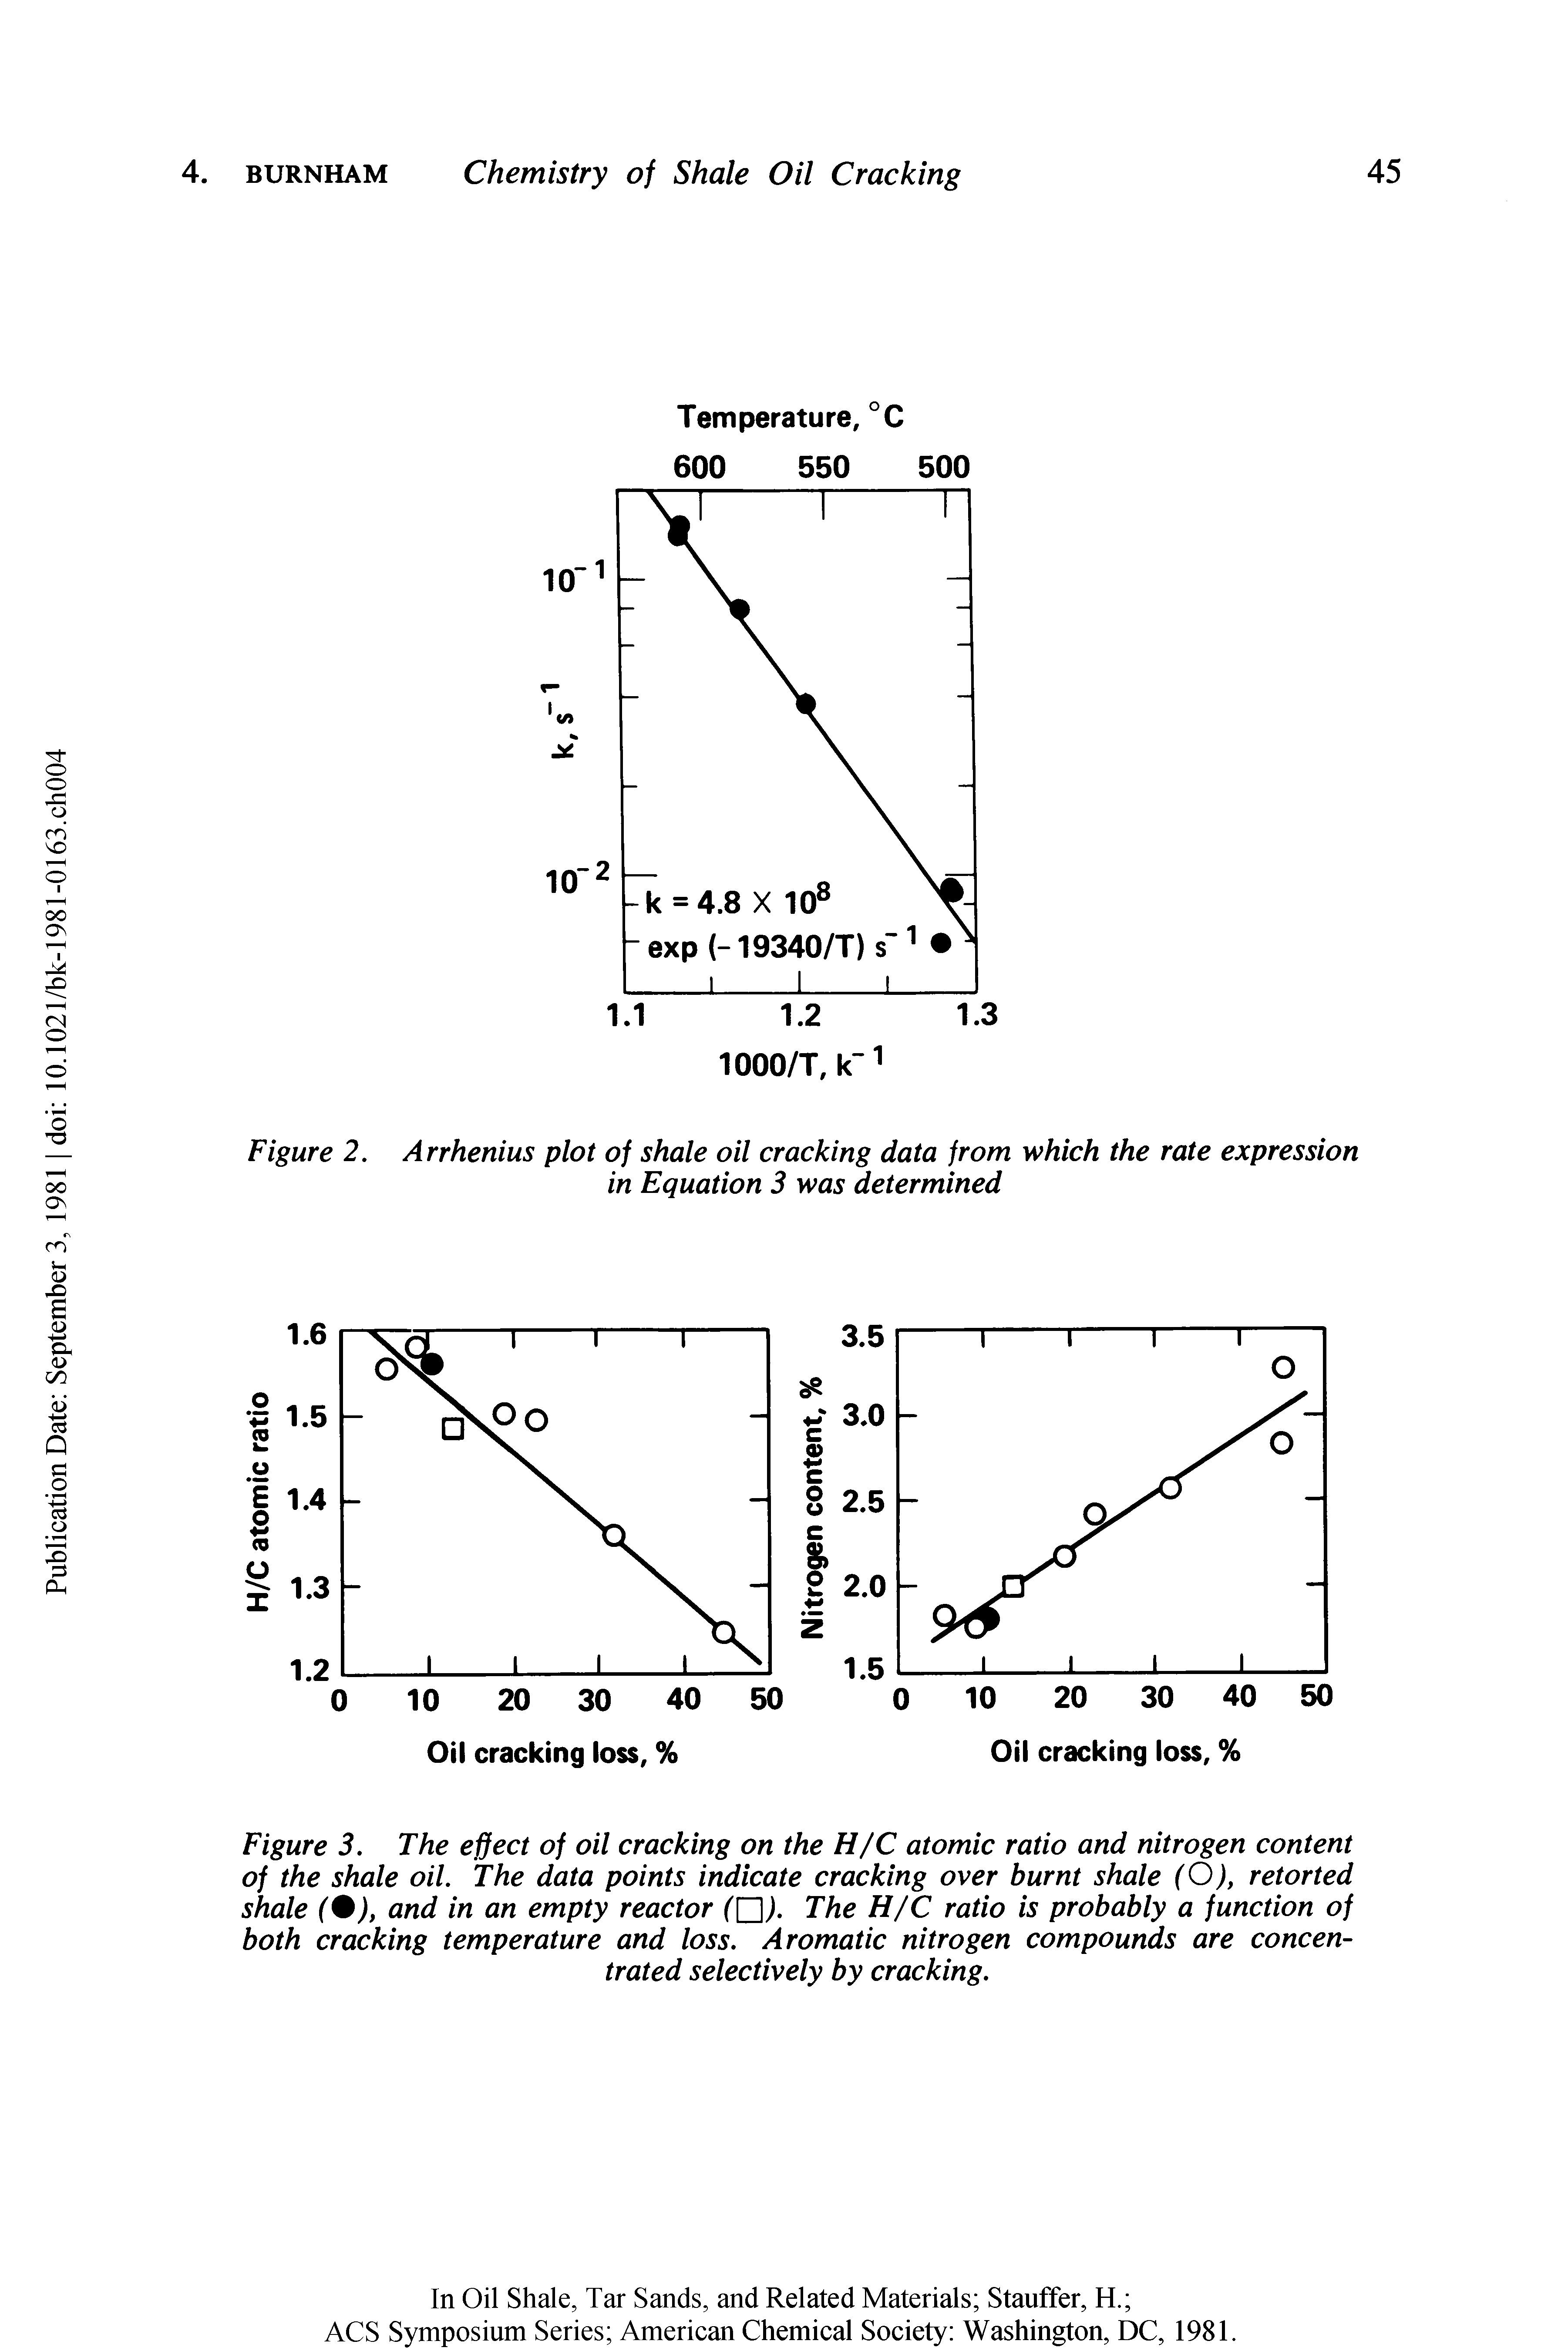 Figure 2. Arrhenius plot of shale oil cracking data from which the rate expression in Equation 3 was determined...